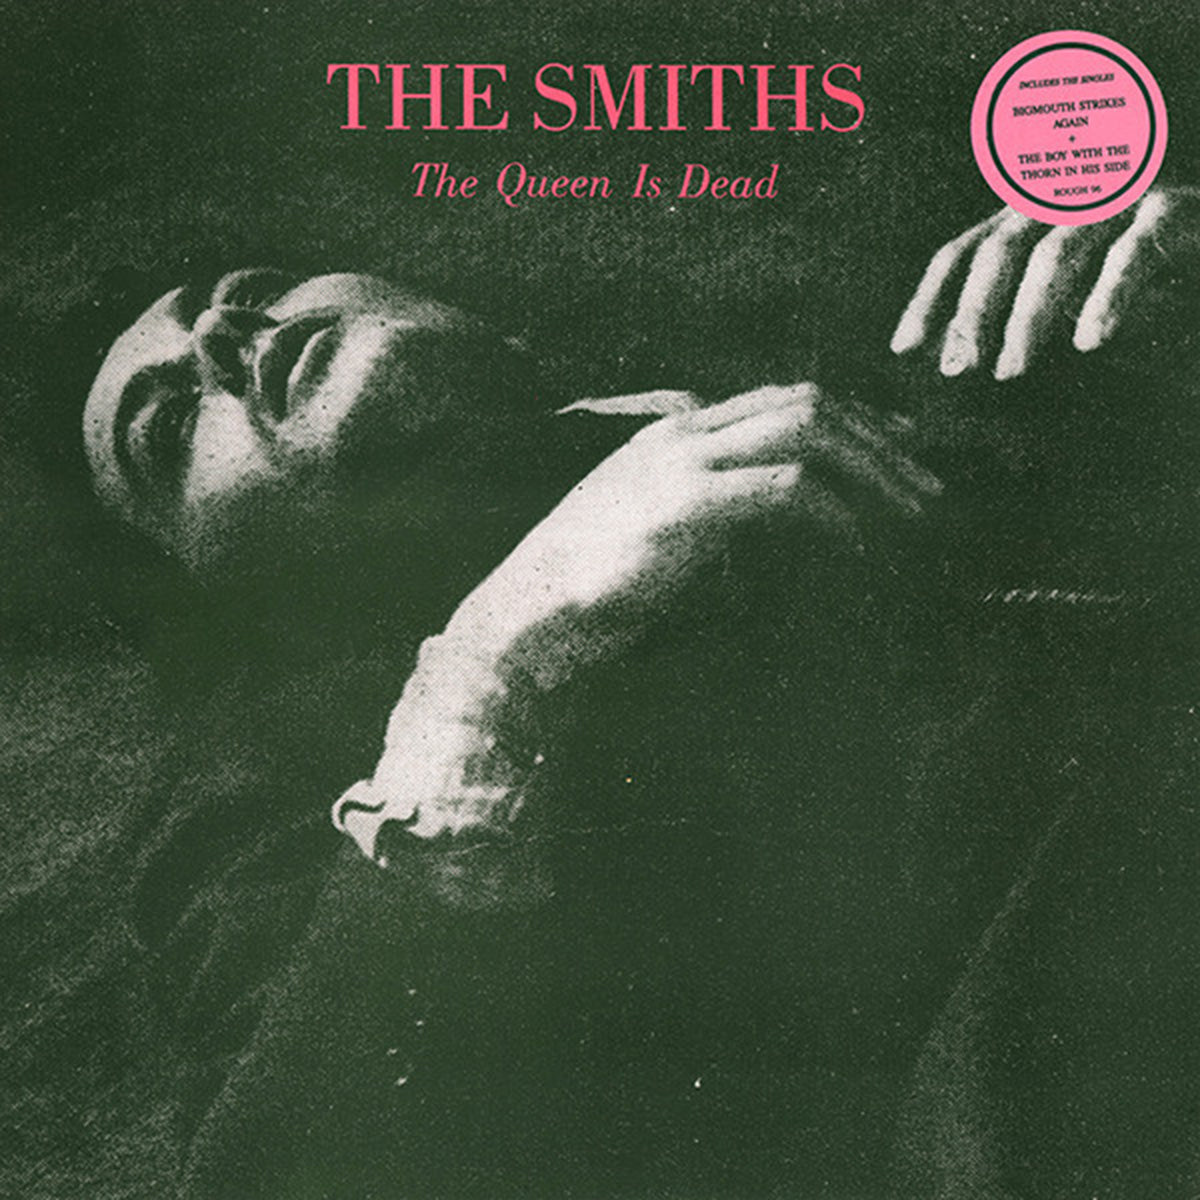 The SMITHS 'THE QUEEN IS DEAD'